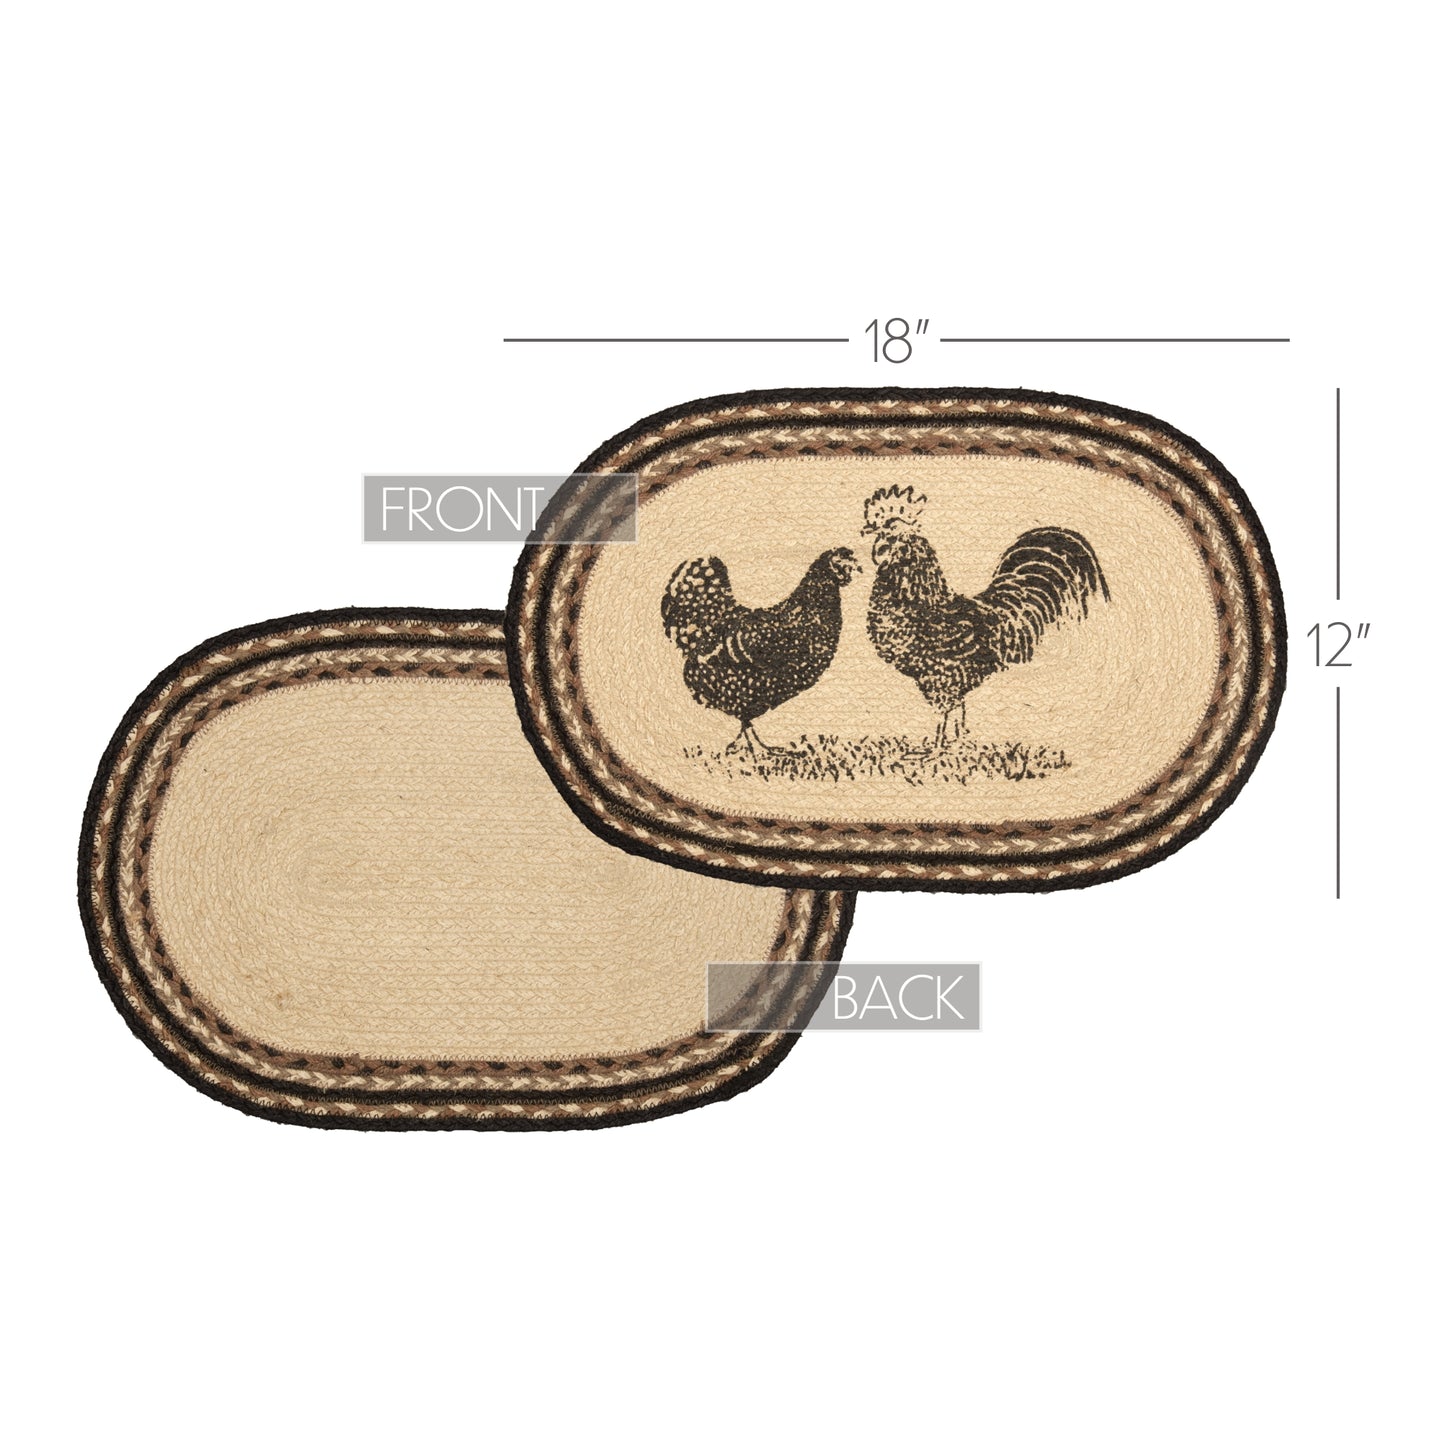 34065-Sawyer-Mill-Charcoal-Poultry-Jute-Placemat-Set-of-6-12x18-image-6